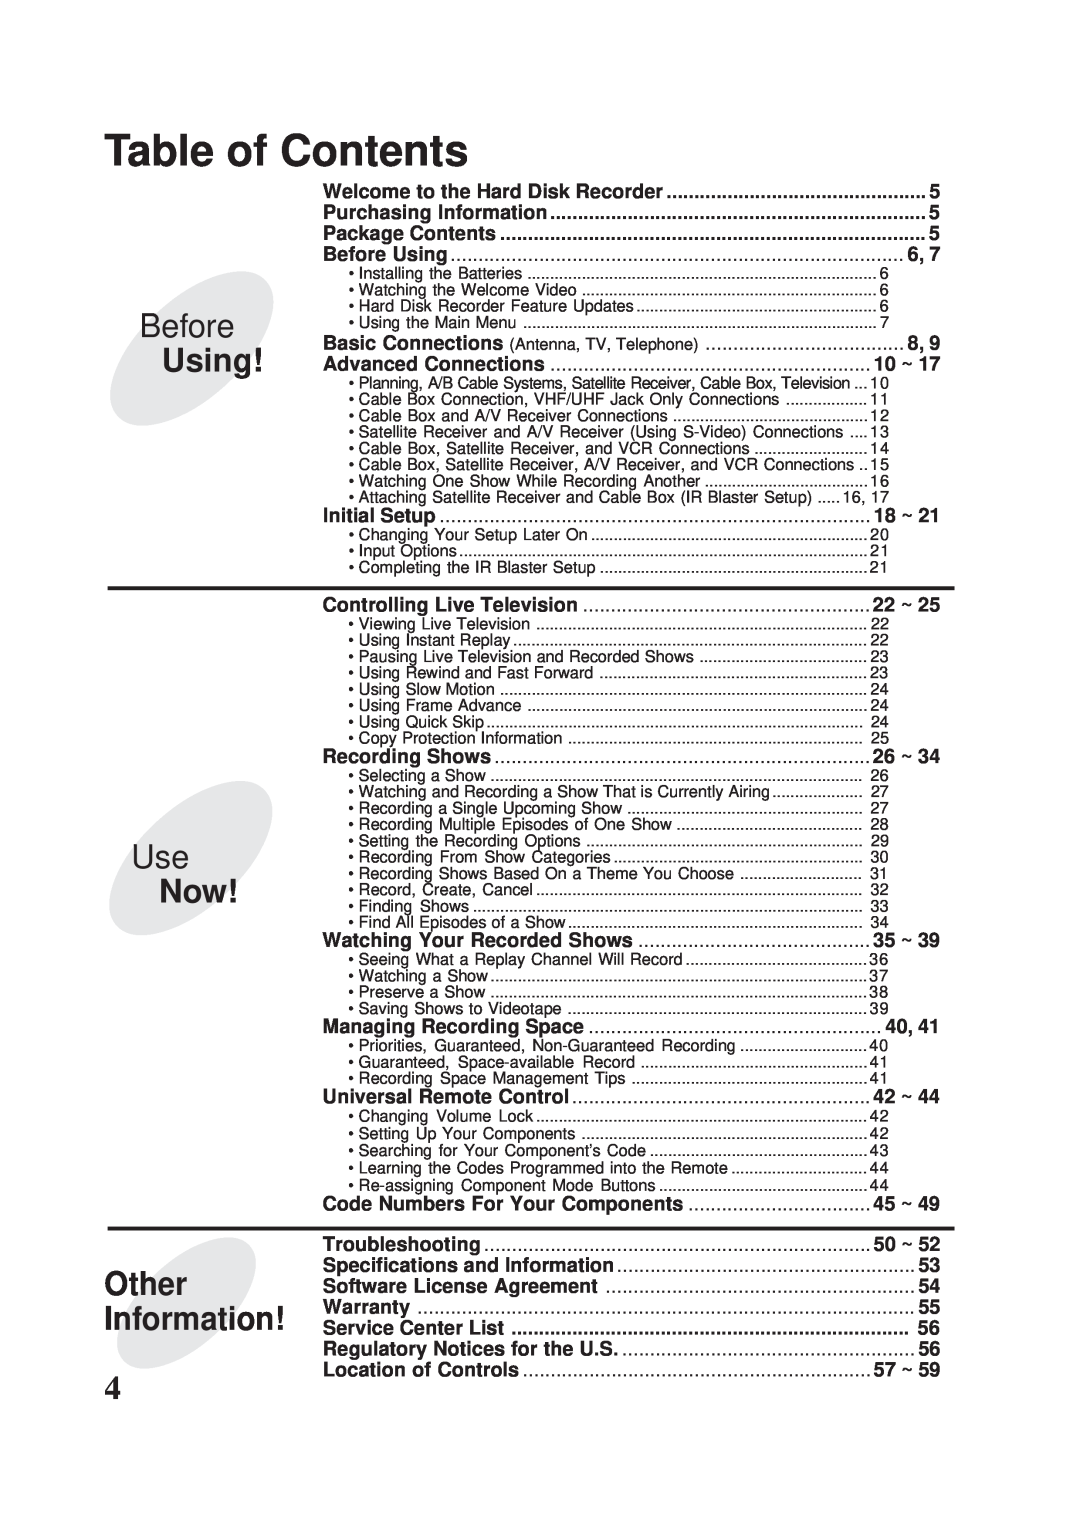 Panasonic PV-HS2000 operating instructions Table of Contents, Before, Using, Other, Information 